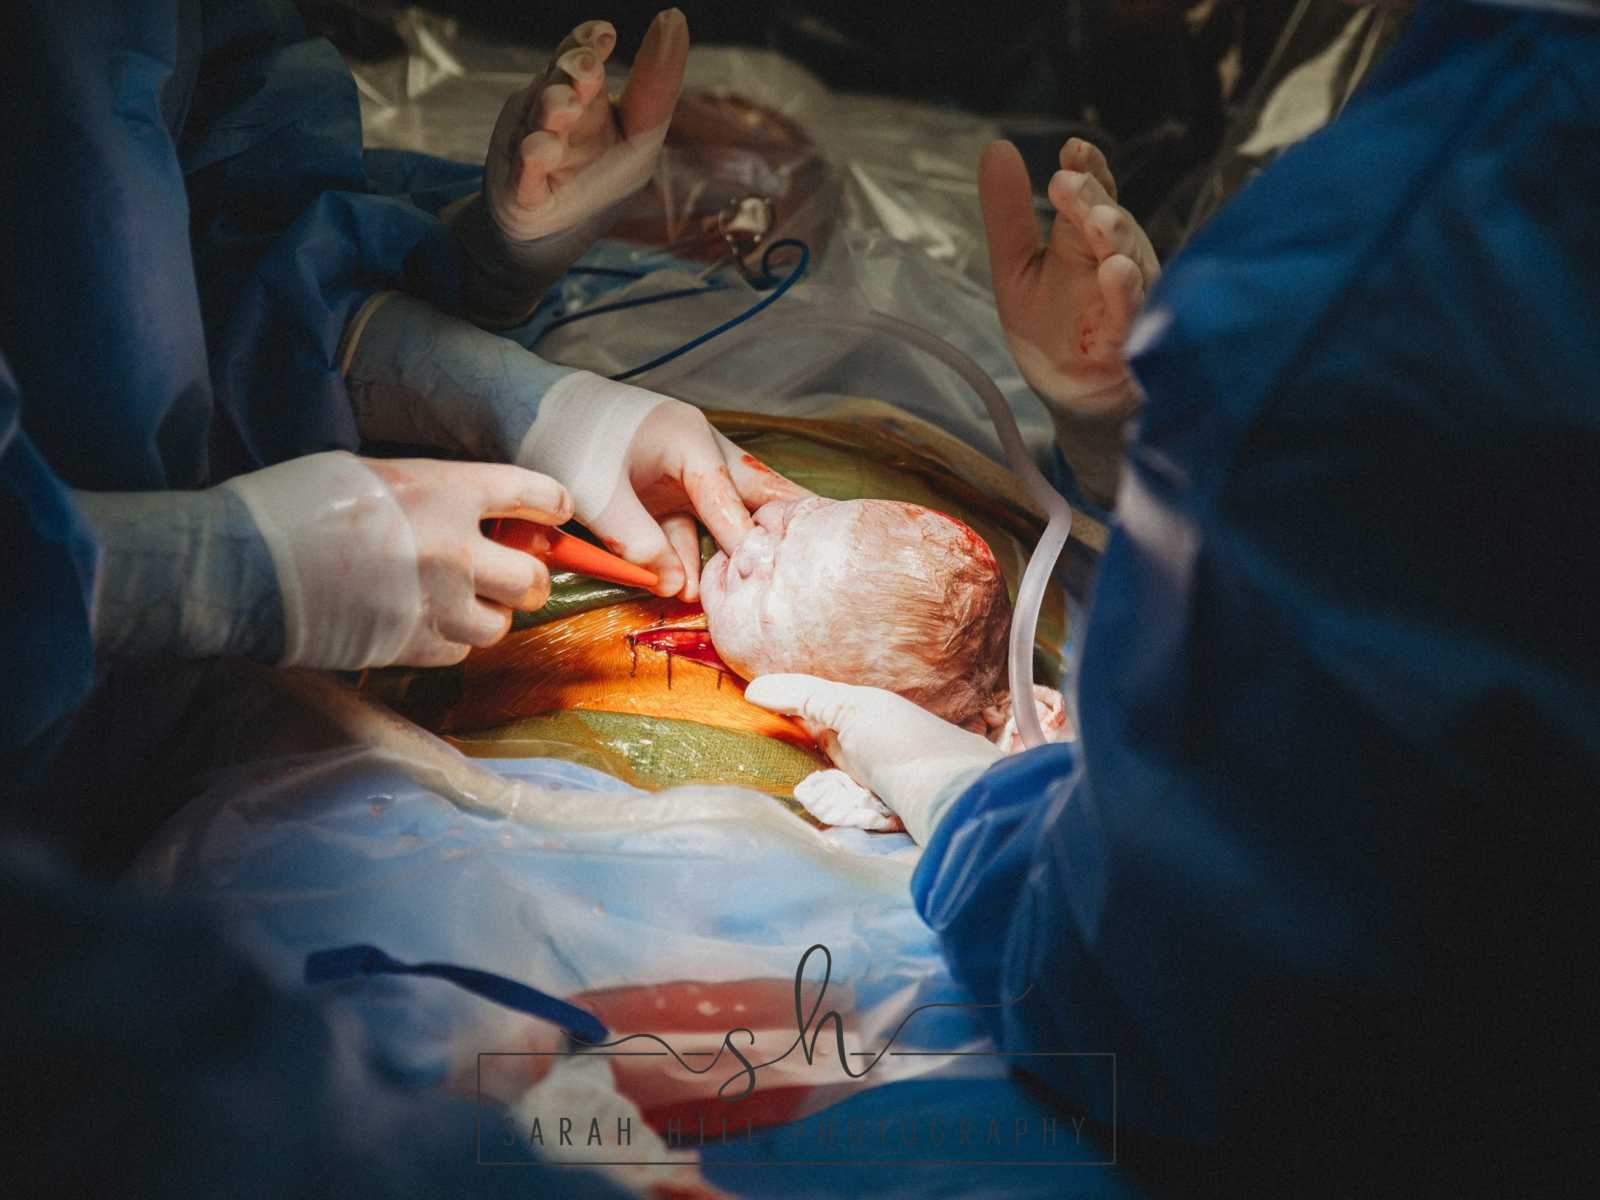 OBGYN performing a c-section operation and pulling baby's head out